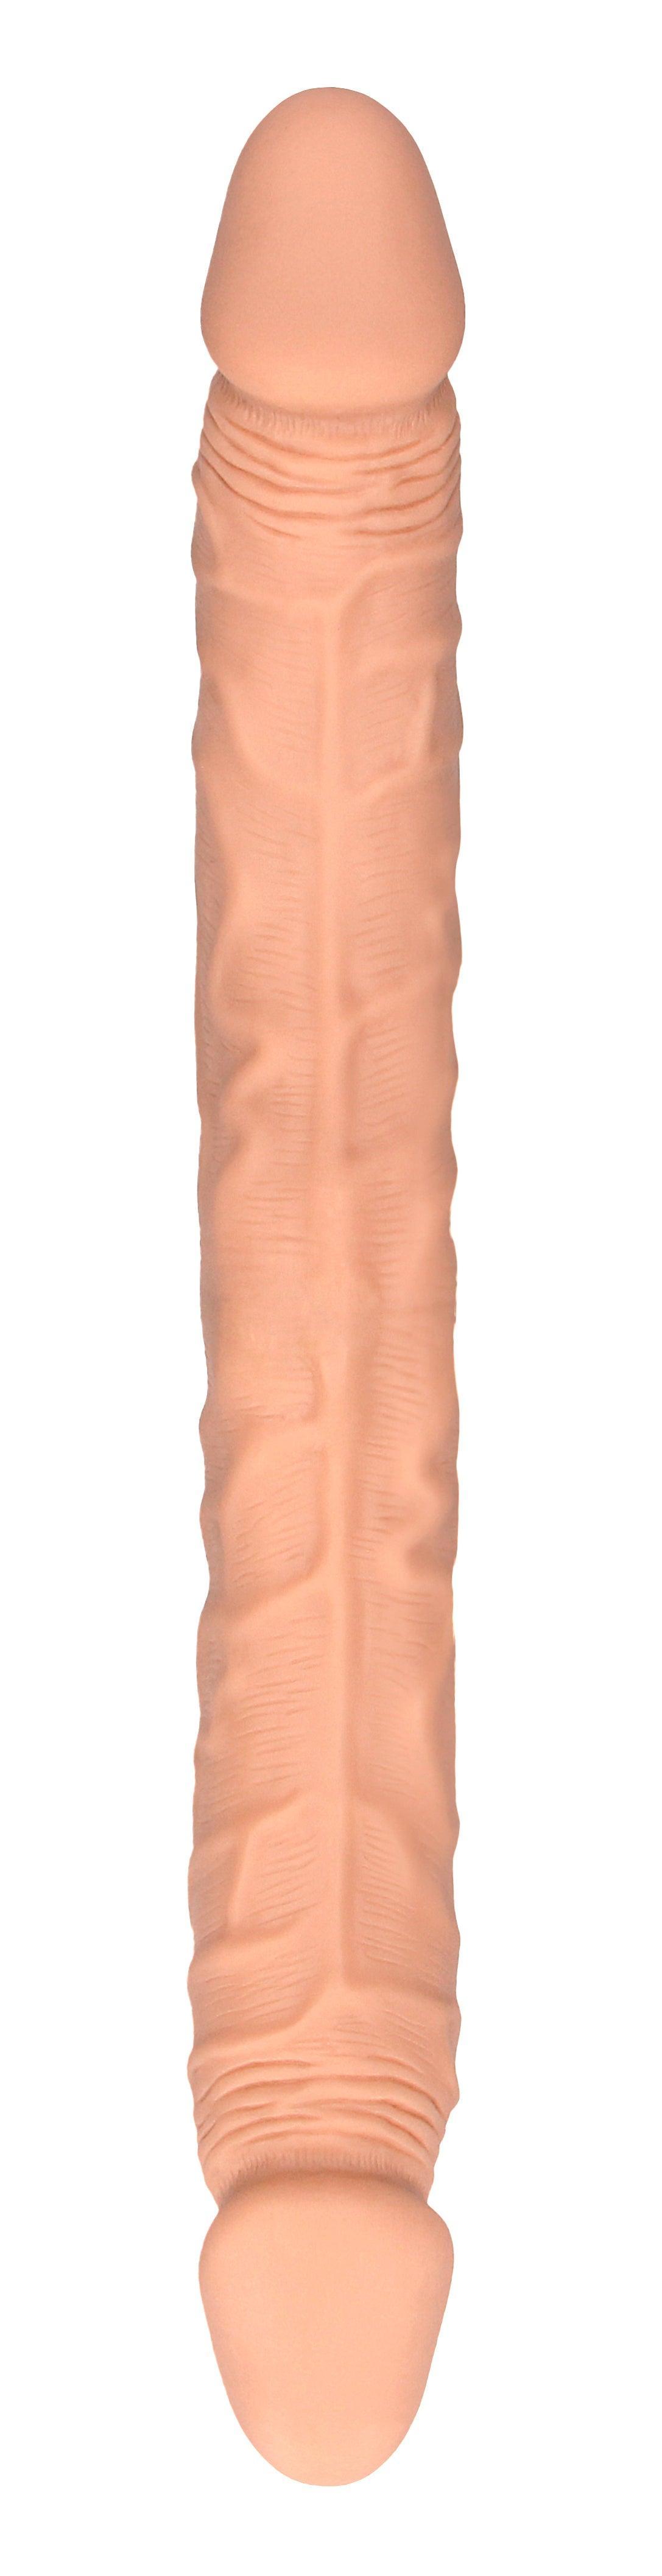 18 Inch Double Dong - Flesh - My Sex Toy Hub